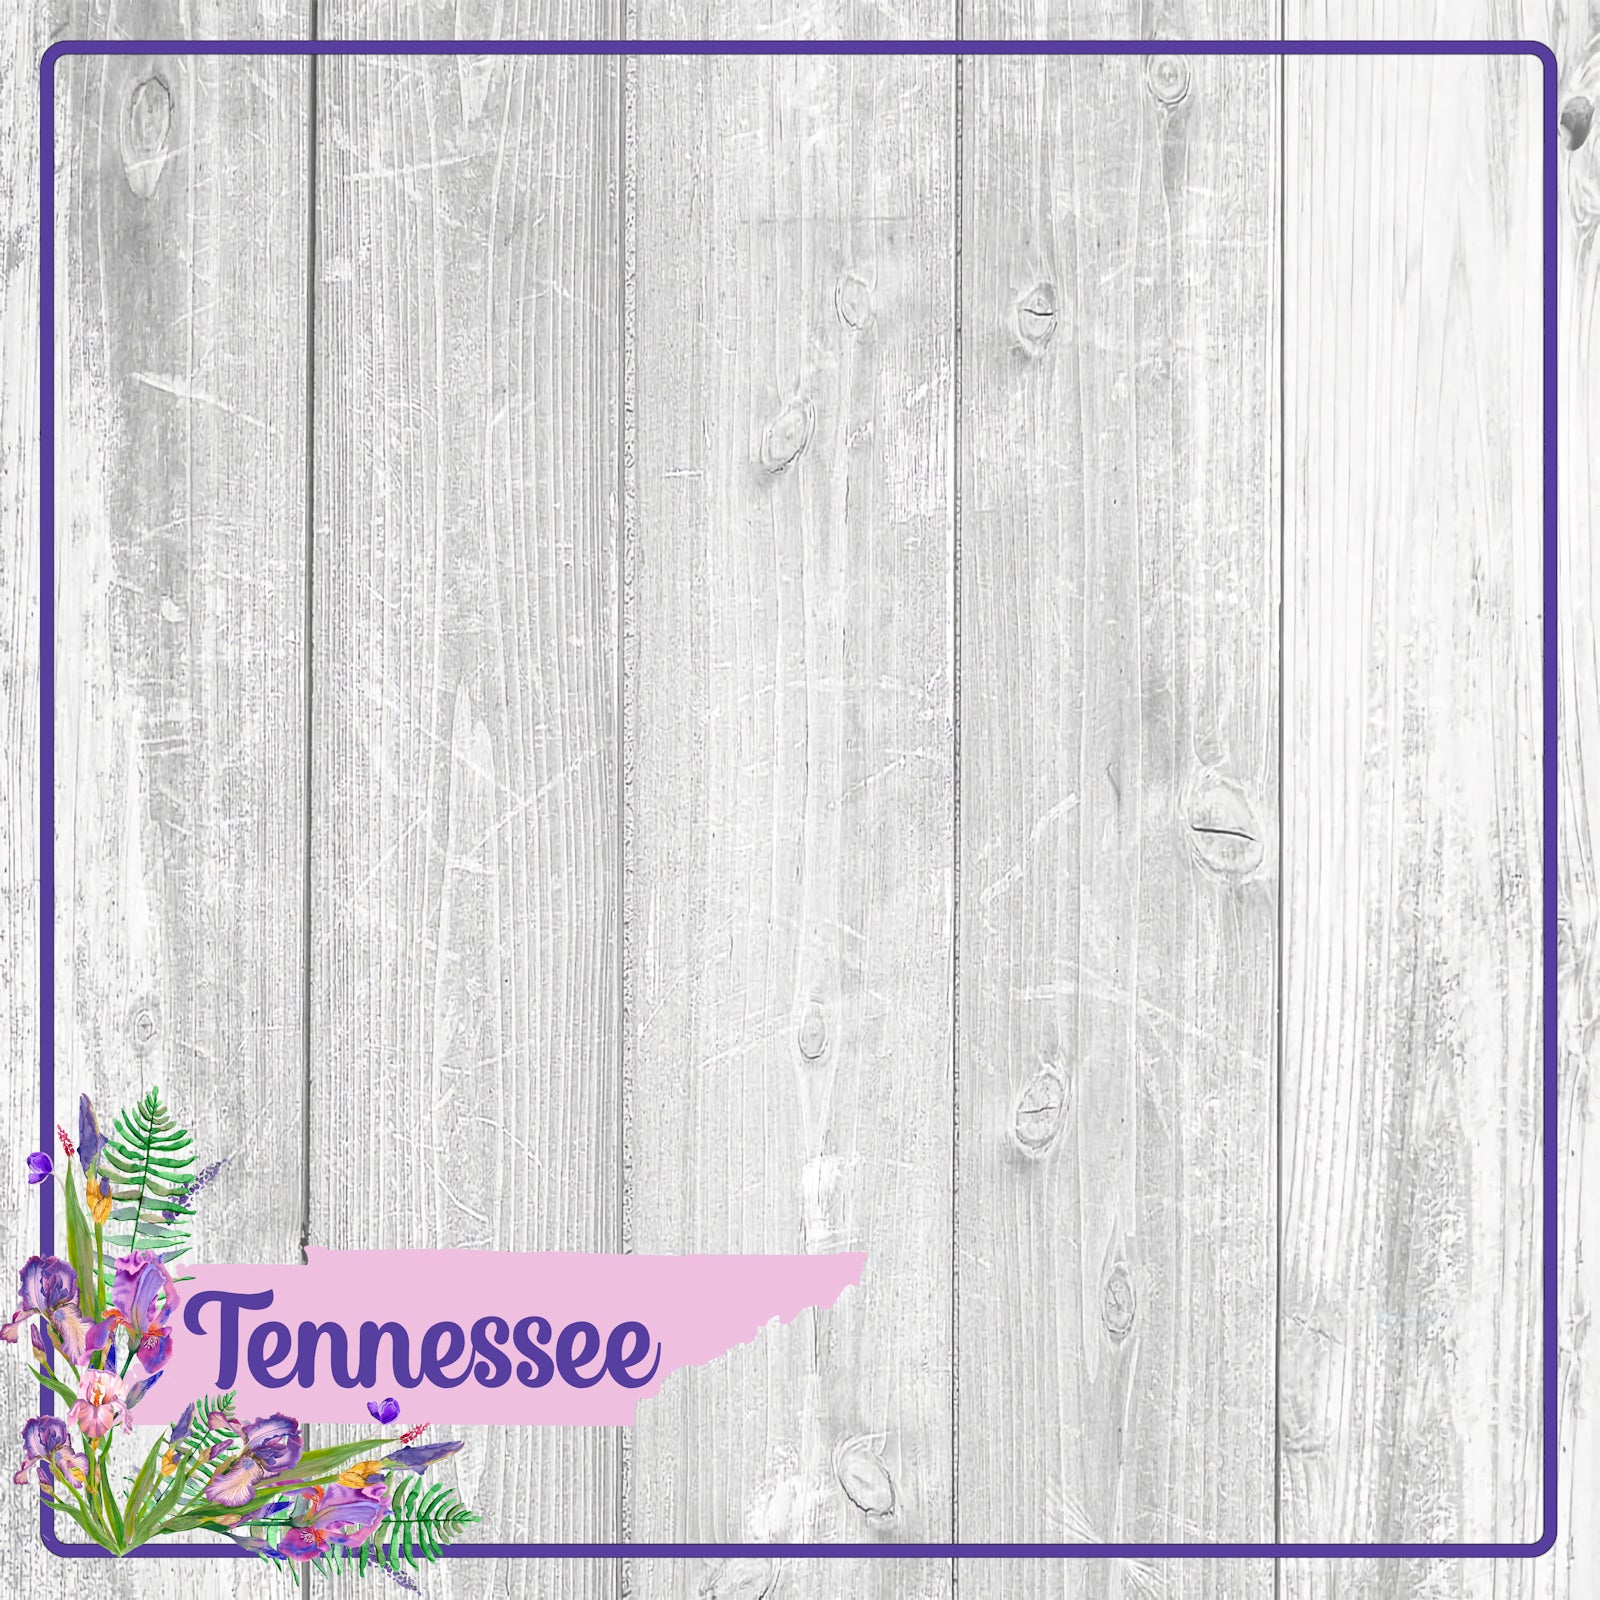 State Flower Collection Tennessee 12 x 12 Double-Sided Scrapbook Paper by SSC Designs